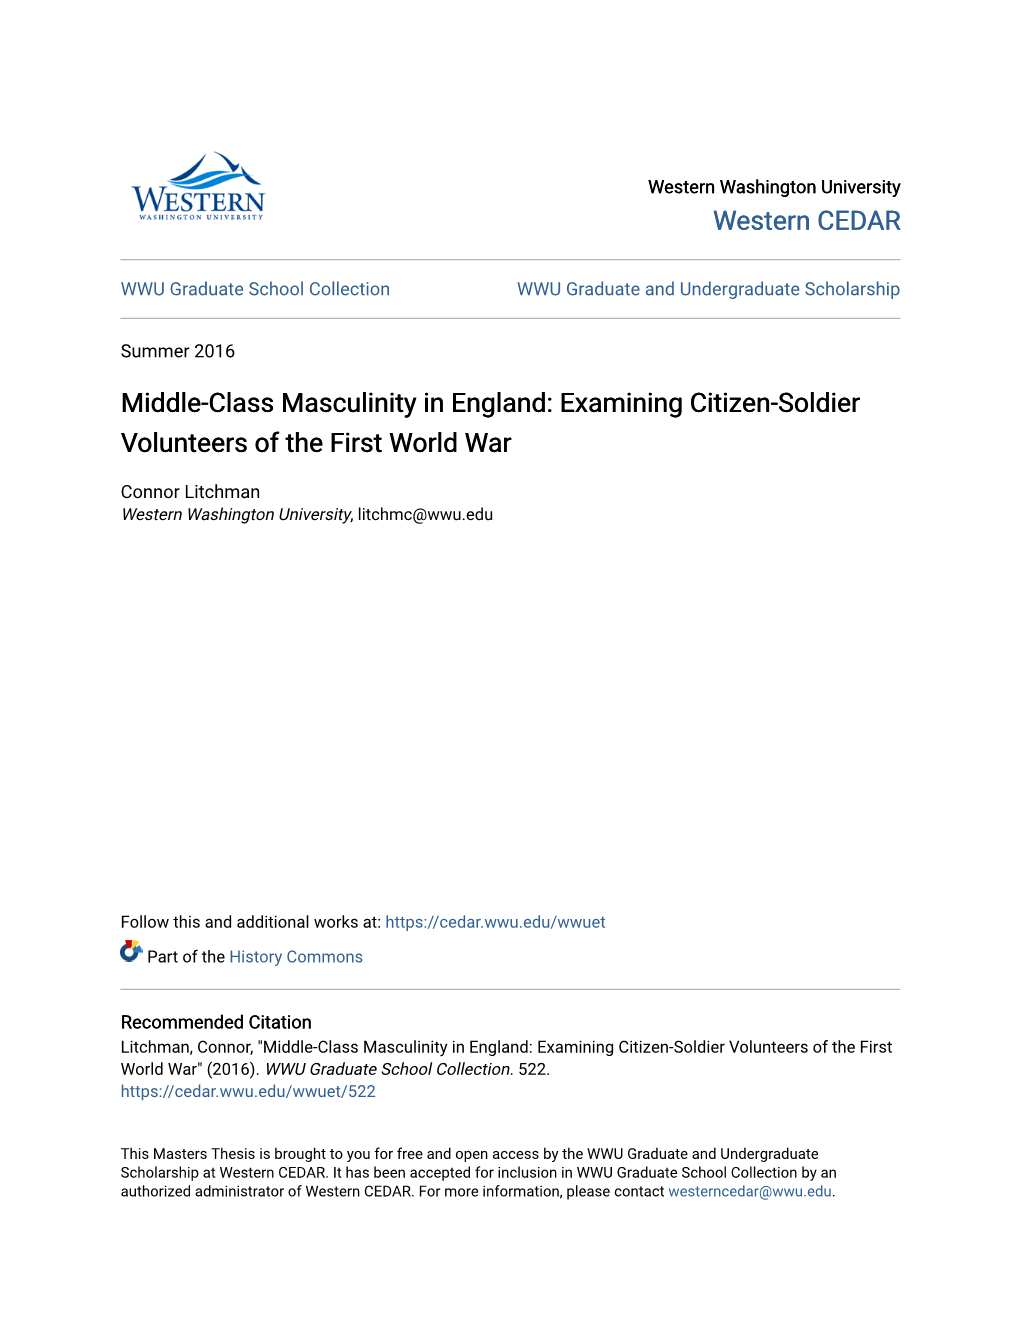 Middle-Class Masculinity in England: Examining Citizen-Soldier Volunteers of the First World War